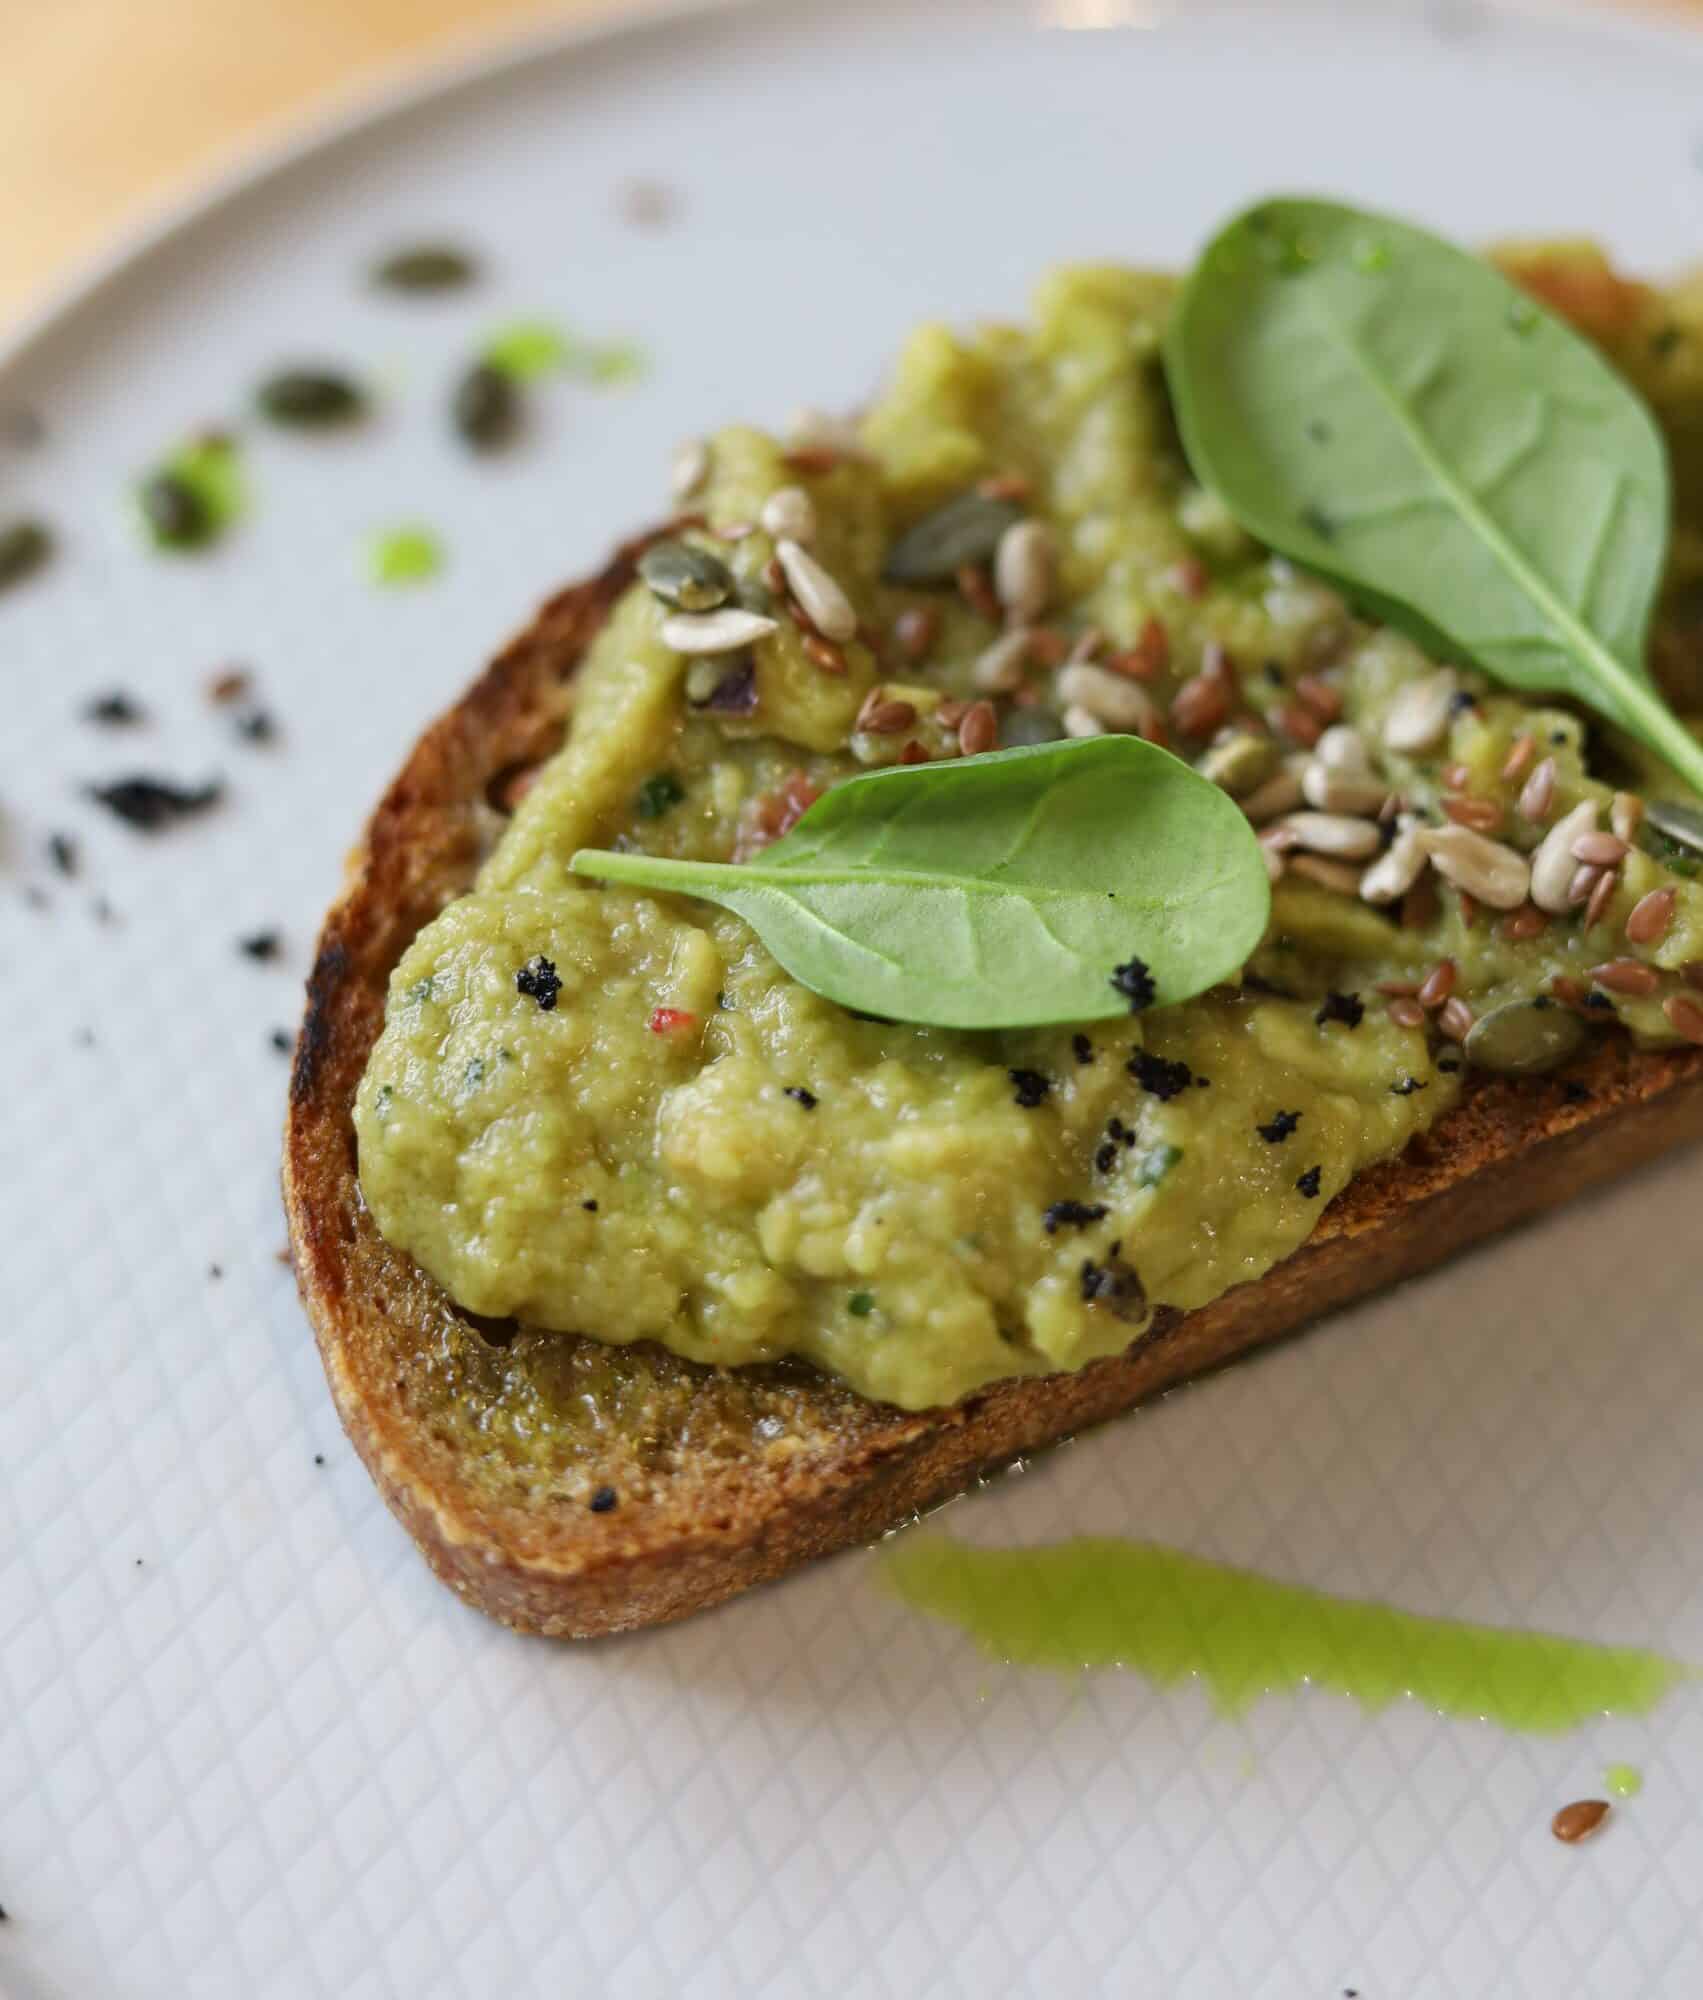 avocado toast made with avocado, sunflower seeds and spinach is sitting on a white plate. there is one slice of the toast. the background is the white plate and a hint of a light brown table. the foreground is the avocado toast